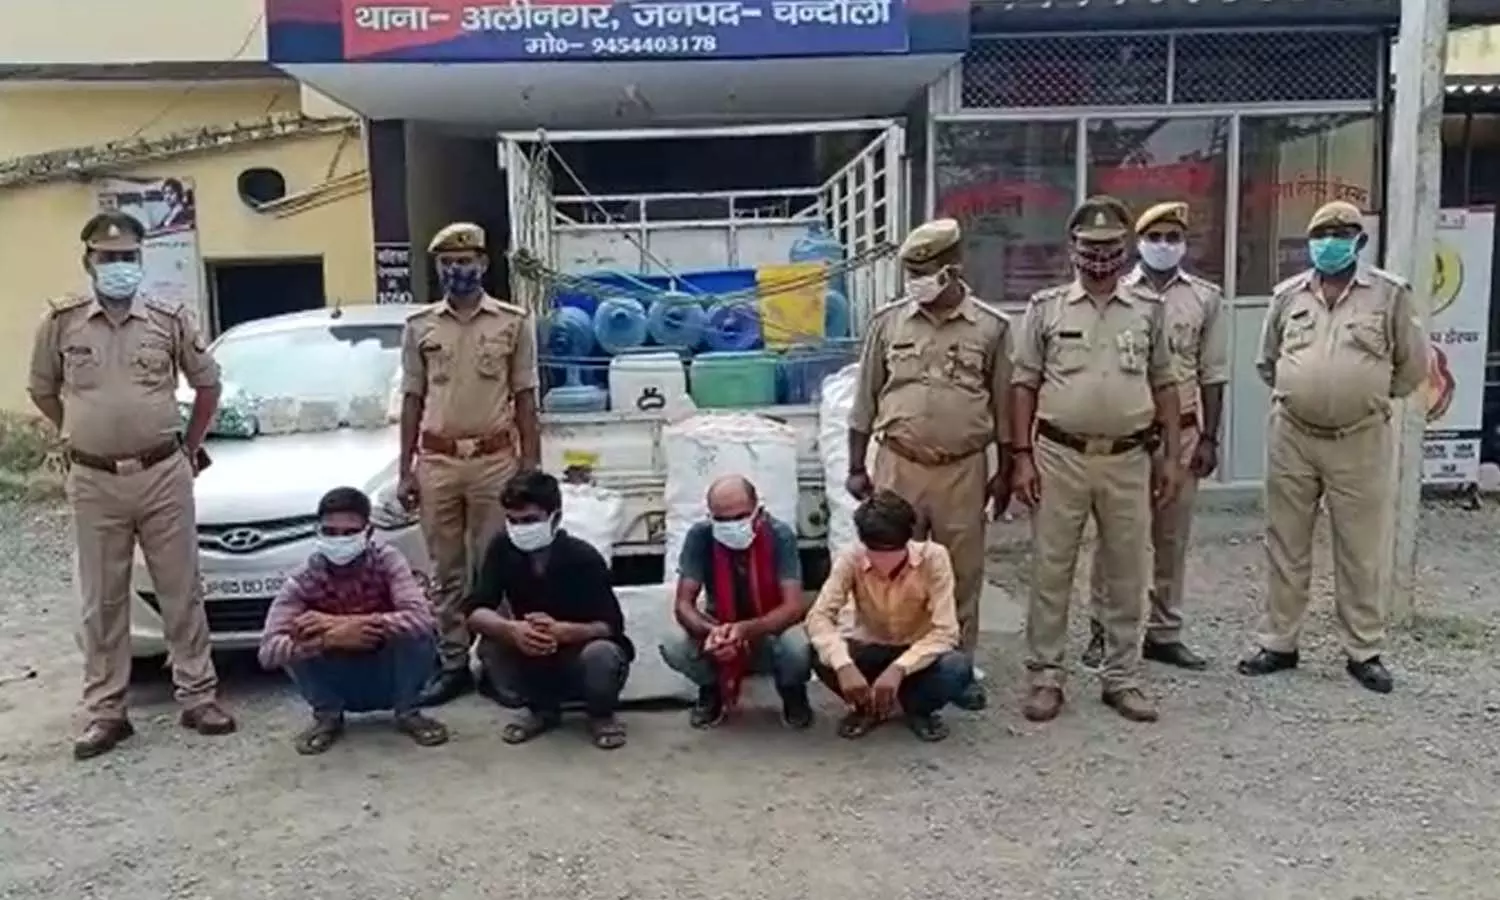 Illegal liquor factory busted police arrested 4 accused